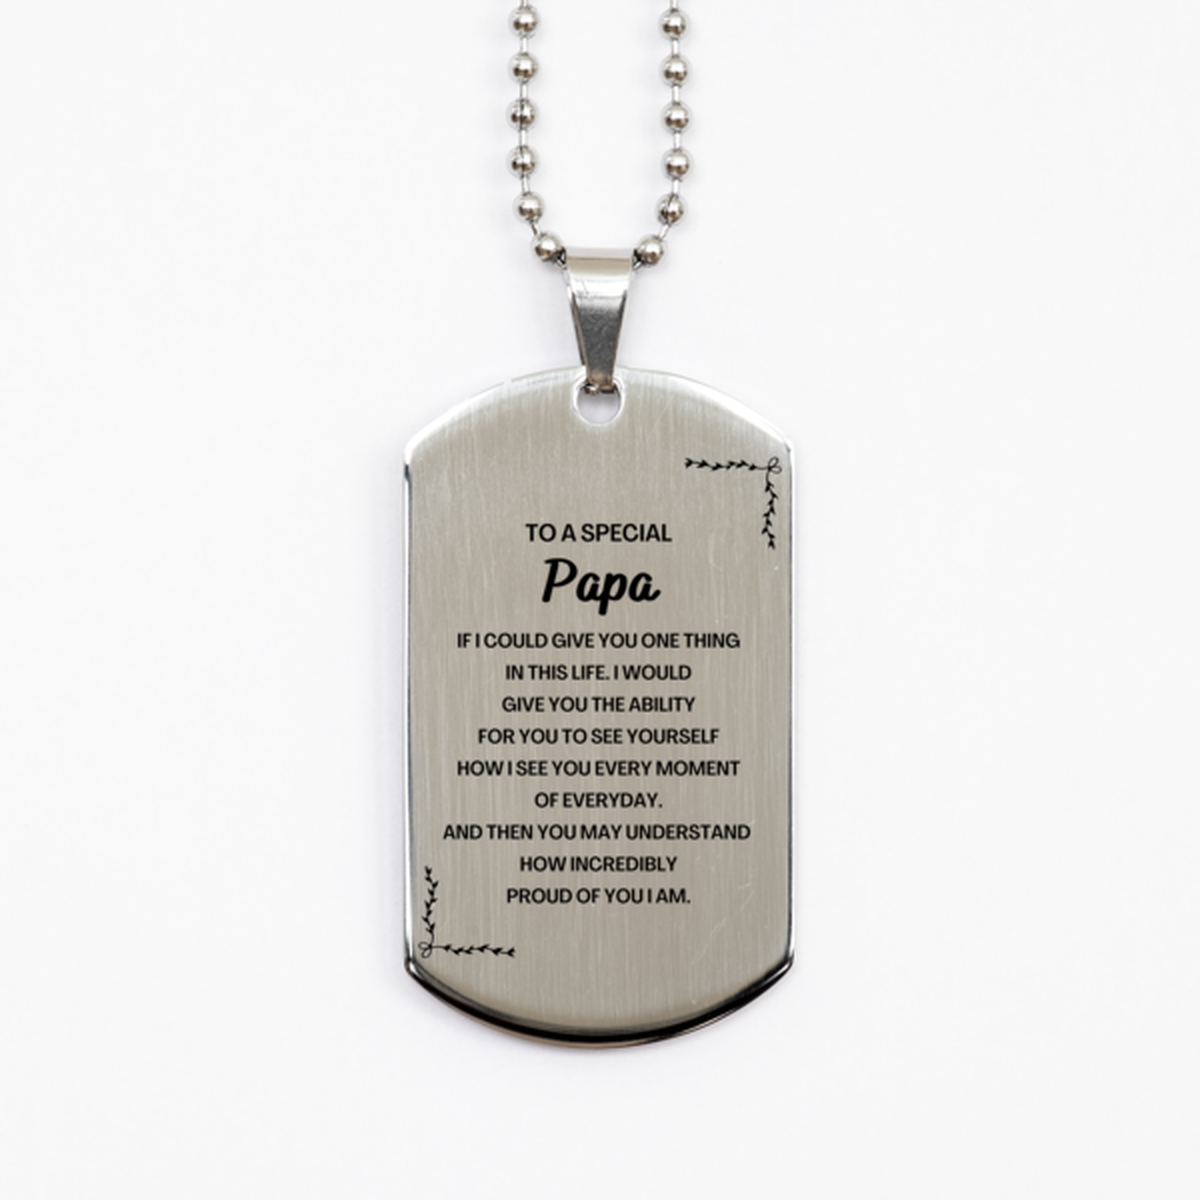 To My Papa Silver Dog Tag, Gifts For Papa Engraved, Inspirational Gifts for Christmas Birthday, Epic Gifts for Papa To A Special Papa how incredibly proud of you I am